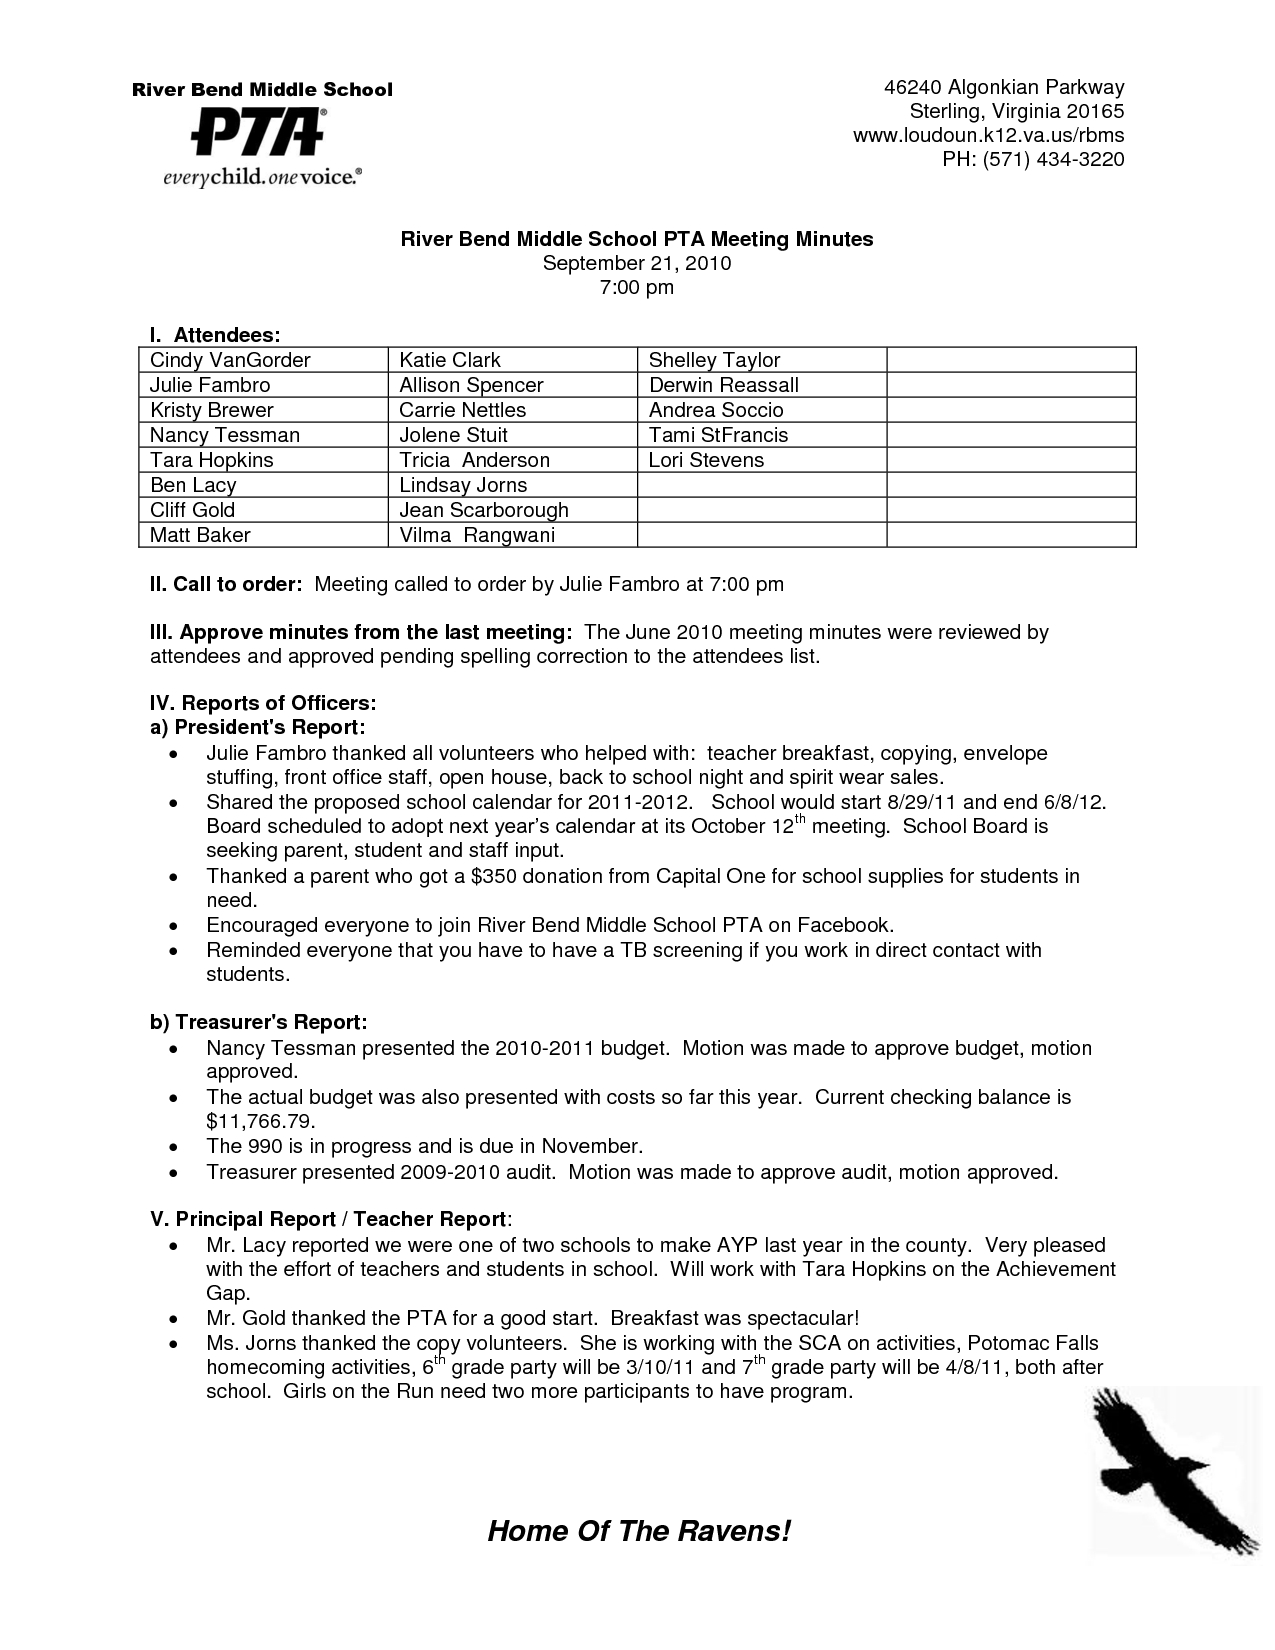 Pto Minutes Template